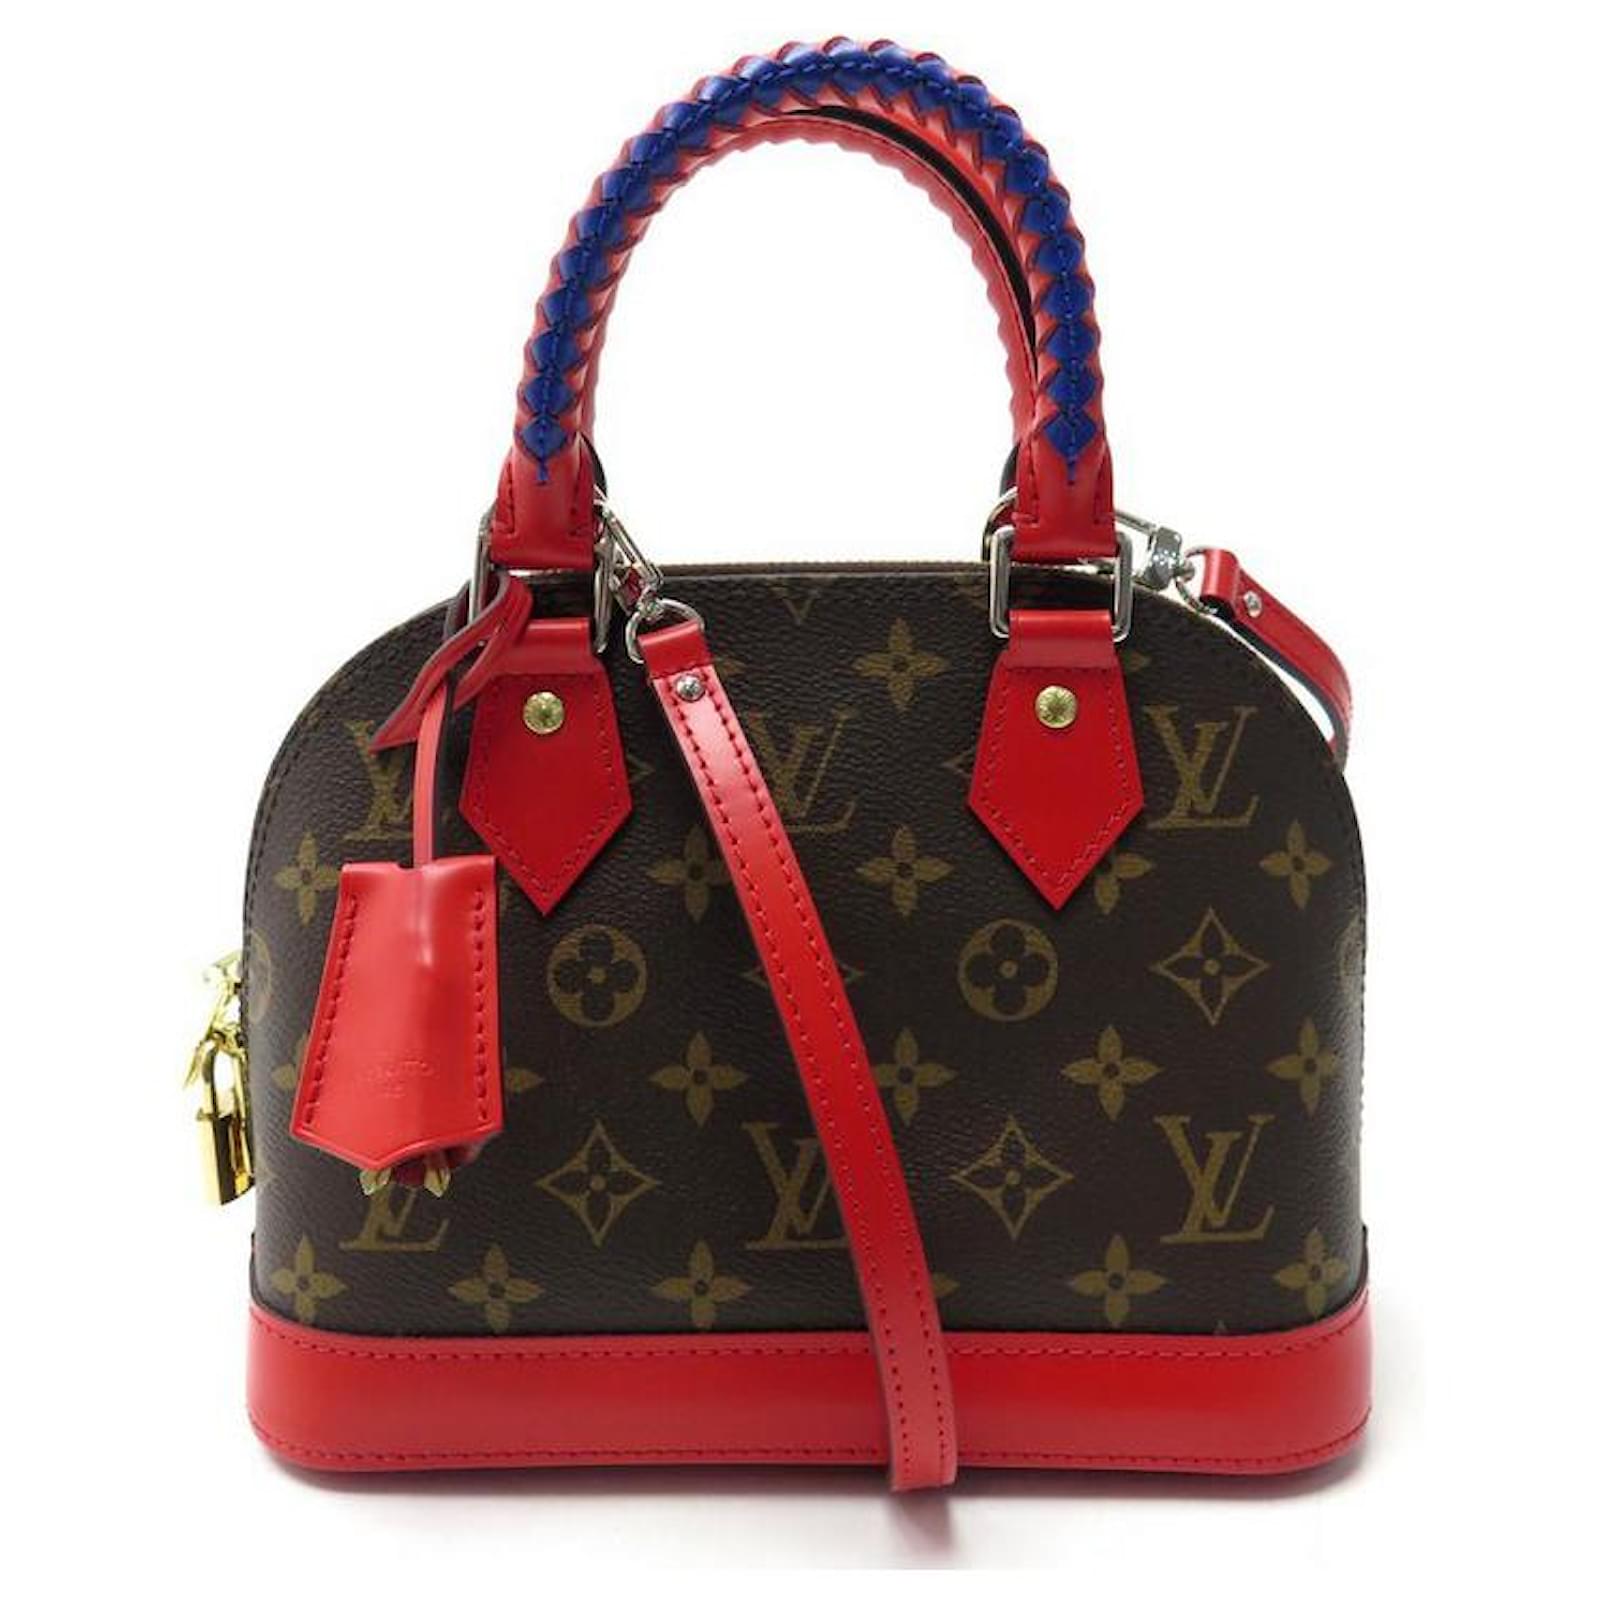 Louis Vuitton Alma Handbag in Brown Monogram Canvas and Red Leather